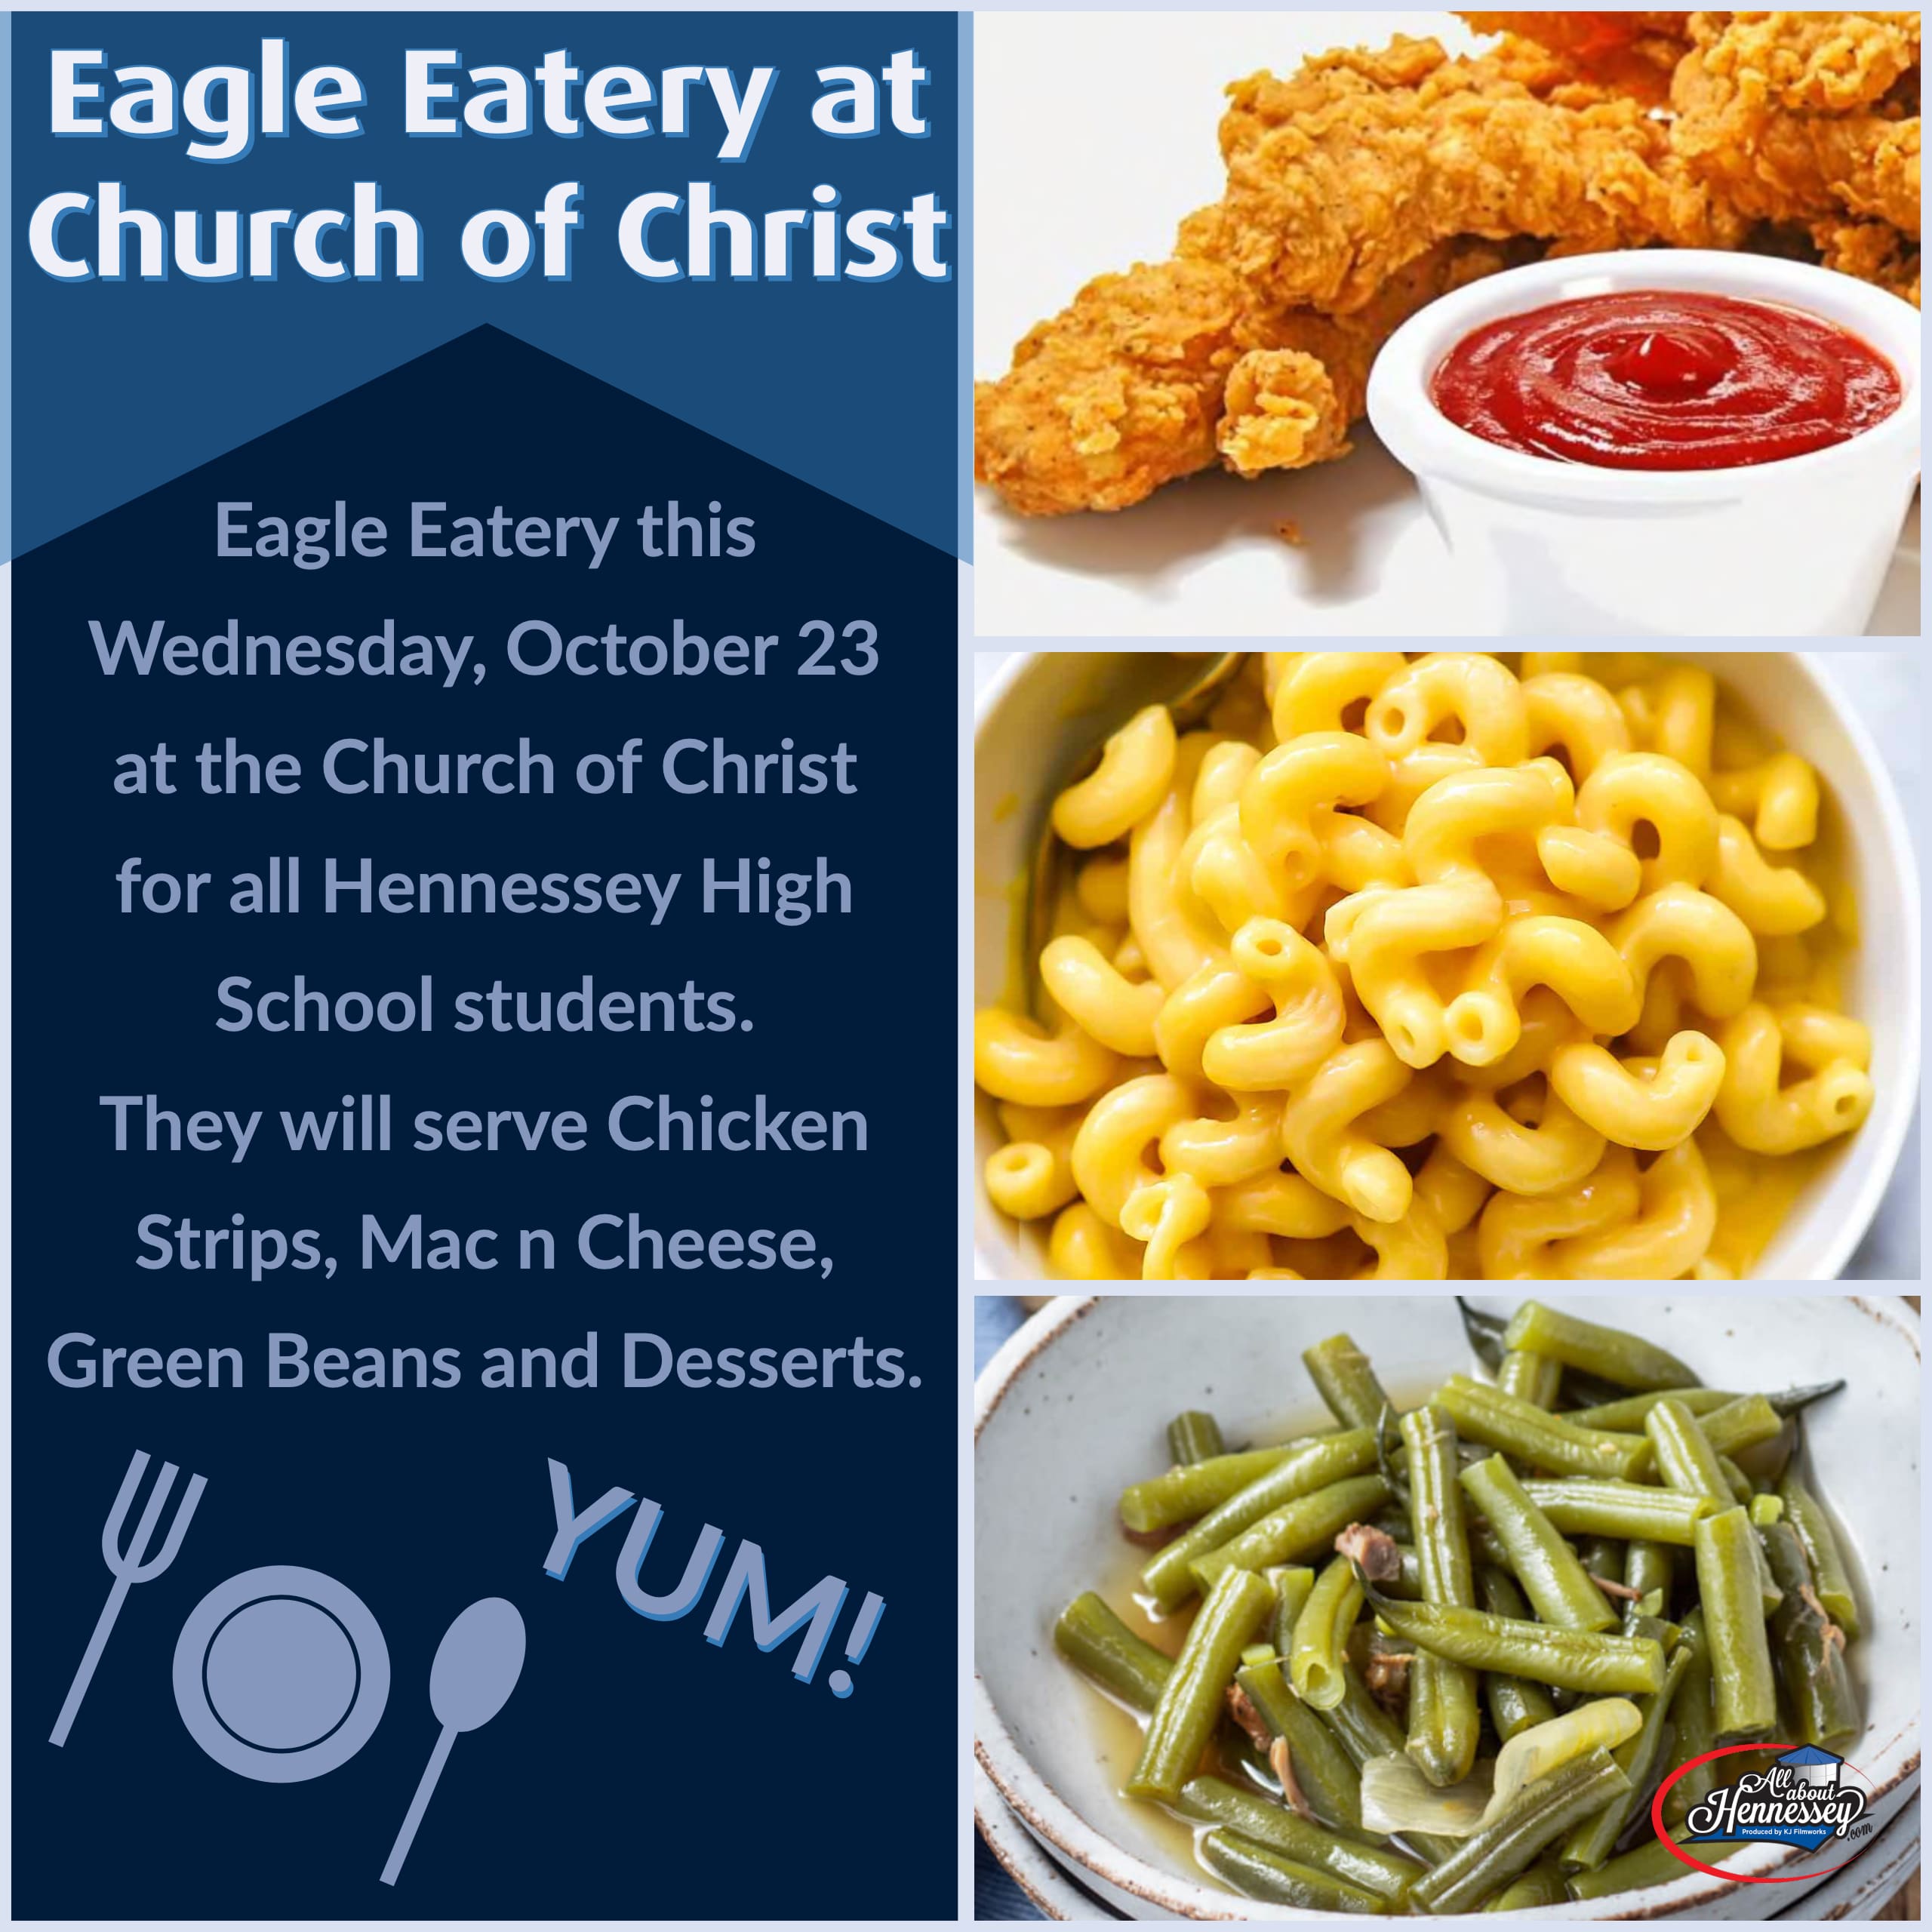 EAGLE EATERY AT CHURCH OF CHRIST WEDNESDAY, OCTOBER 23